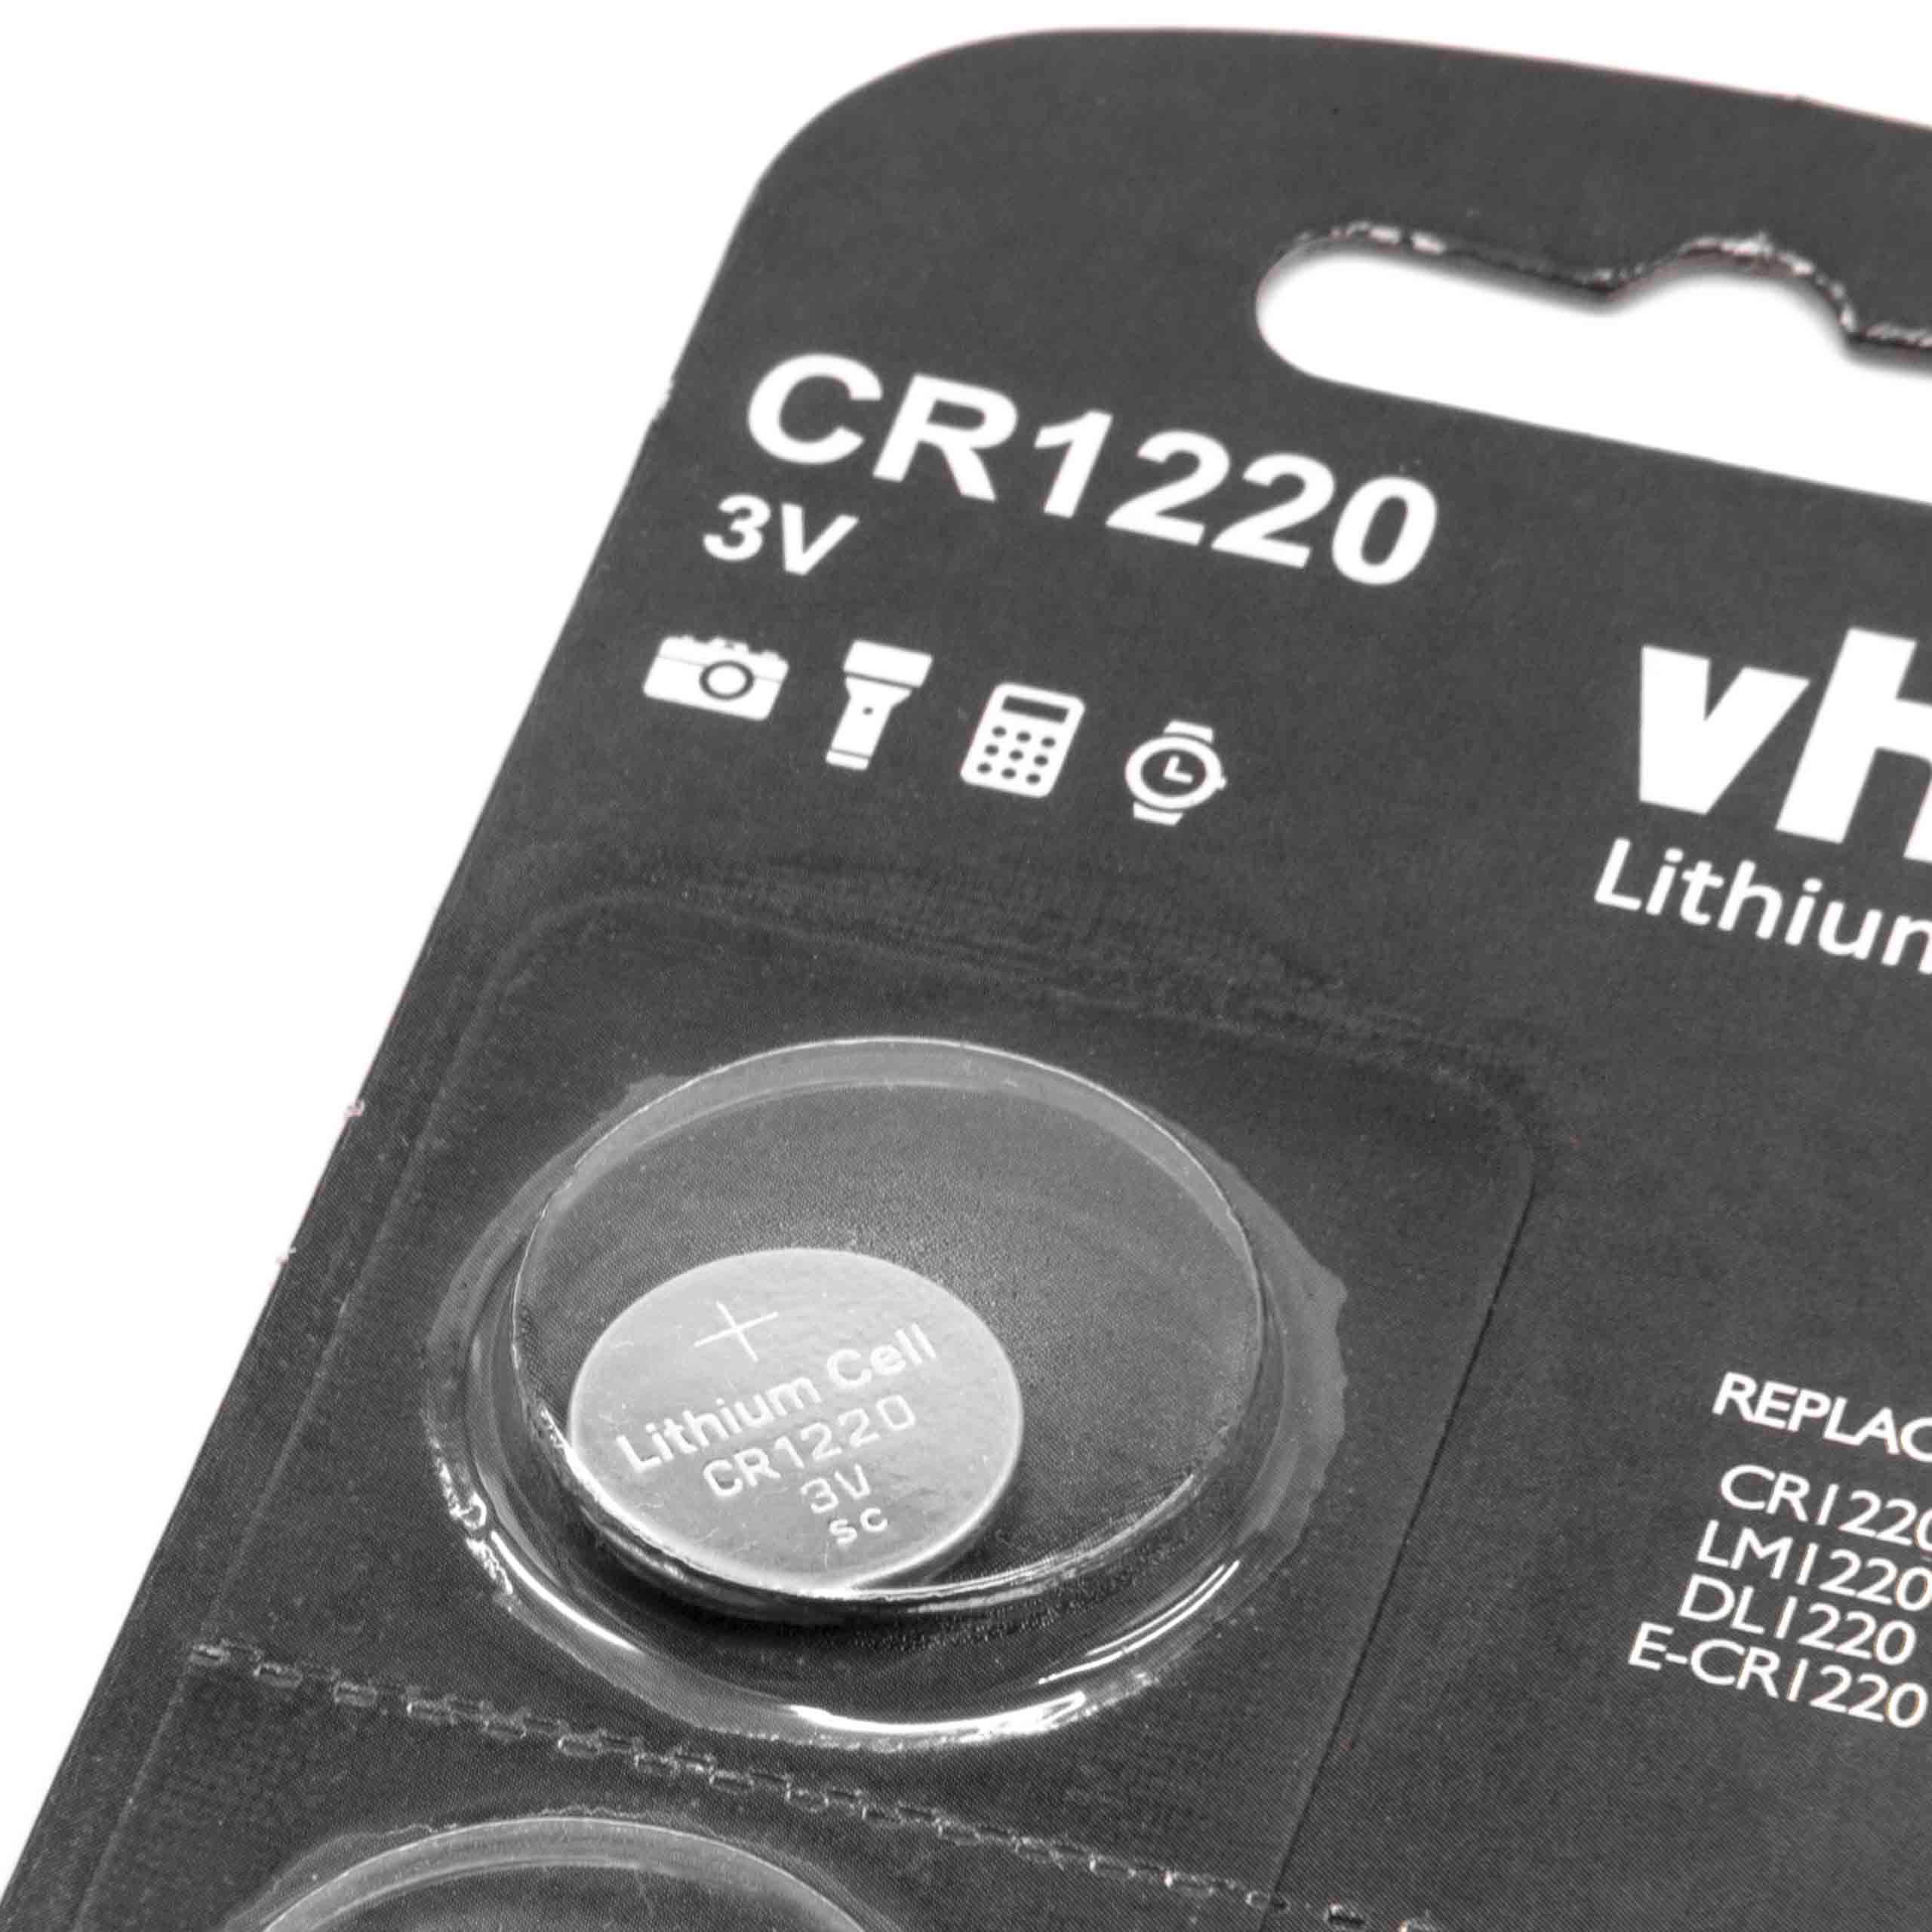 10x 3 V Li-Ion Button Coin Cell Battery Type CR1220 suitable for Hearing Aids, Watches, Car Keys, Scales etc.